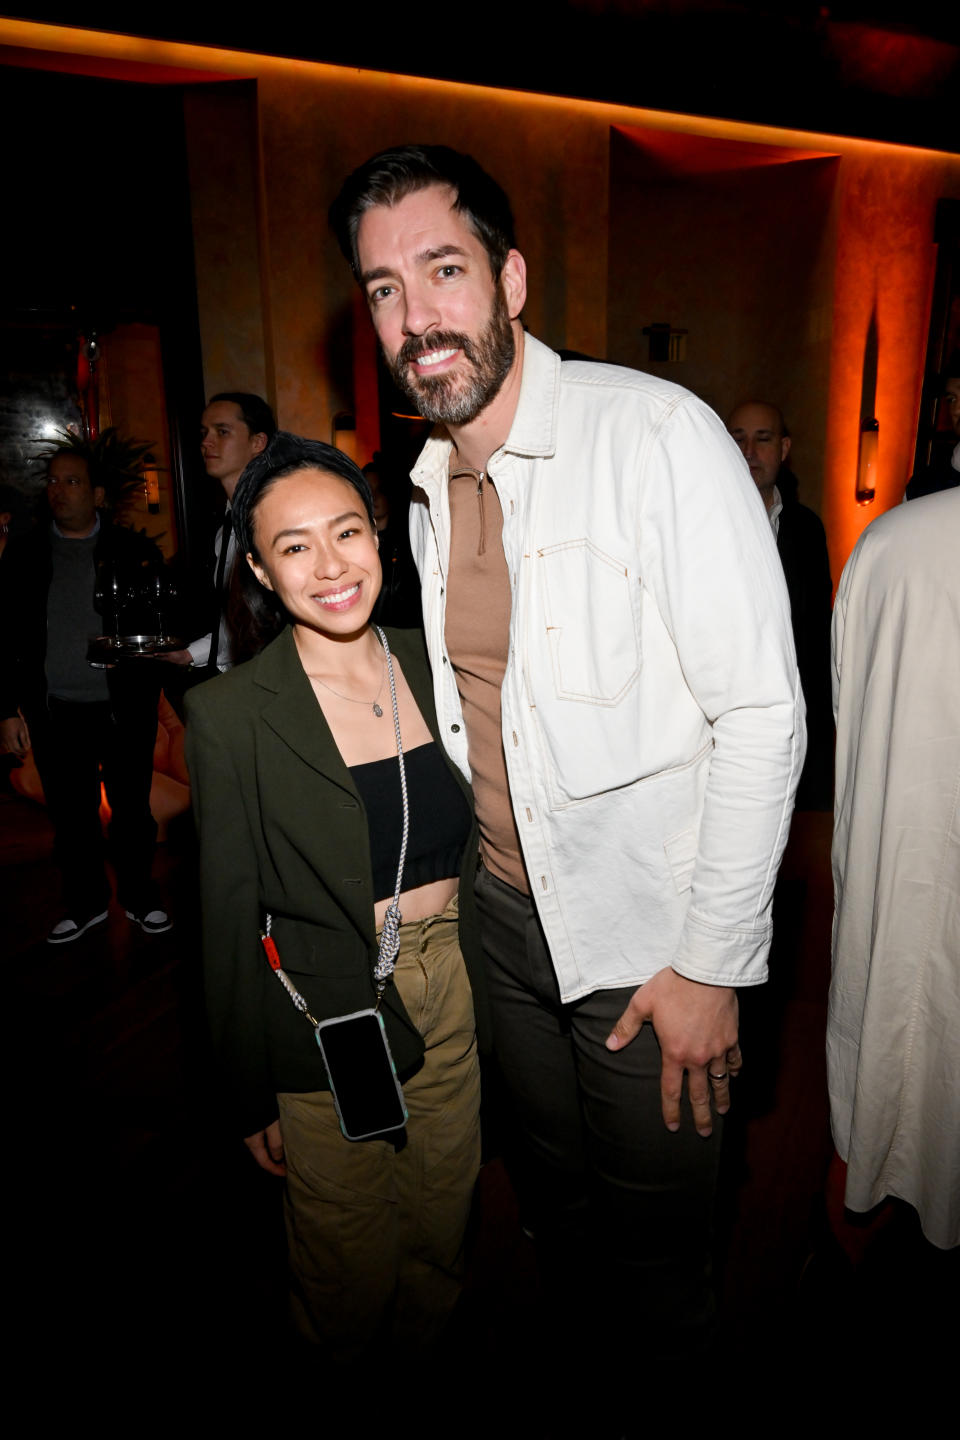 Rebecca Lim and Drew Scott at the premiere of "Beef" party on March 30, 2023 in Los Angeles, California. (Photo by Michael Buckner/Variety via Getty Images)